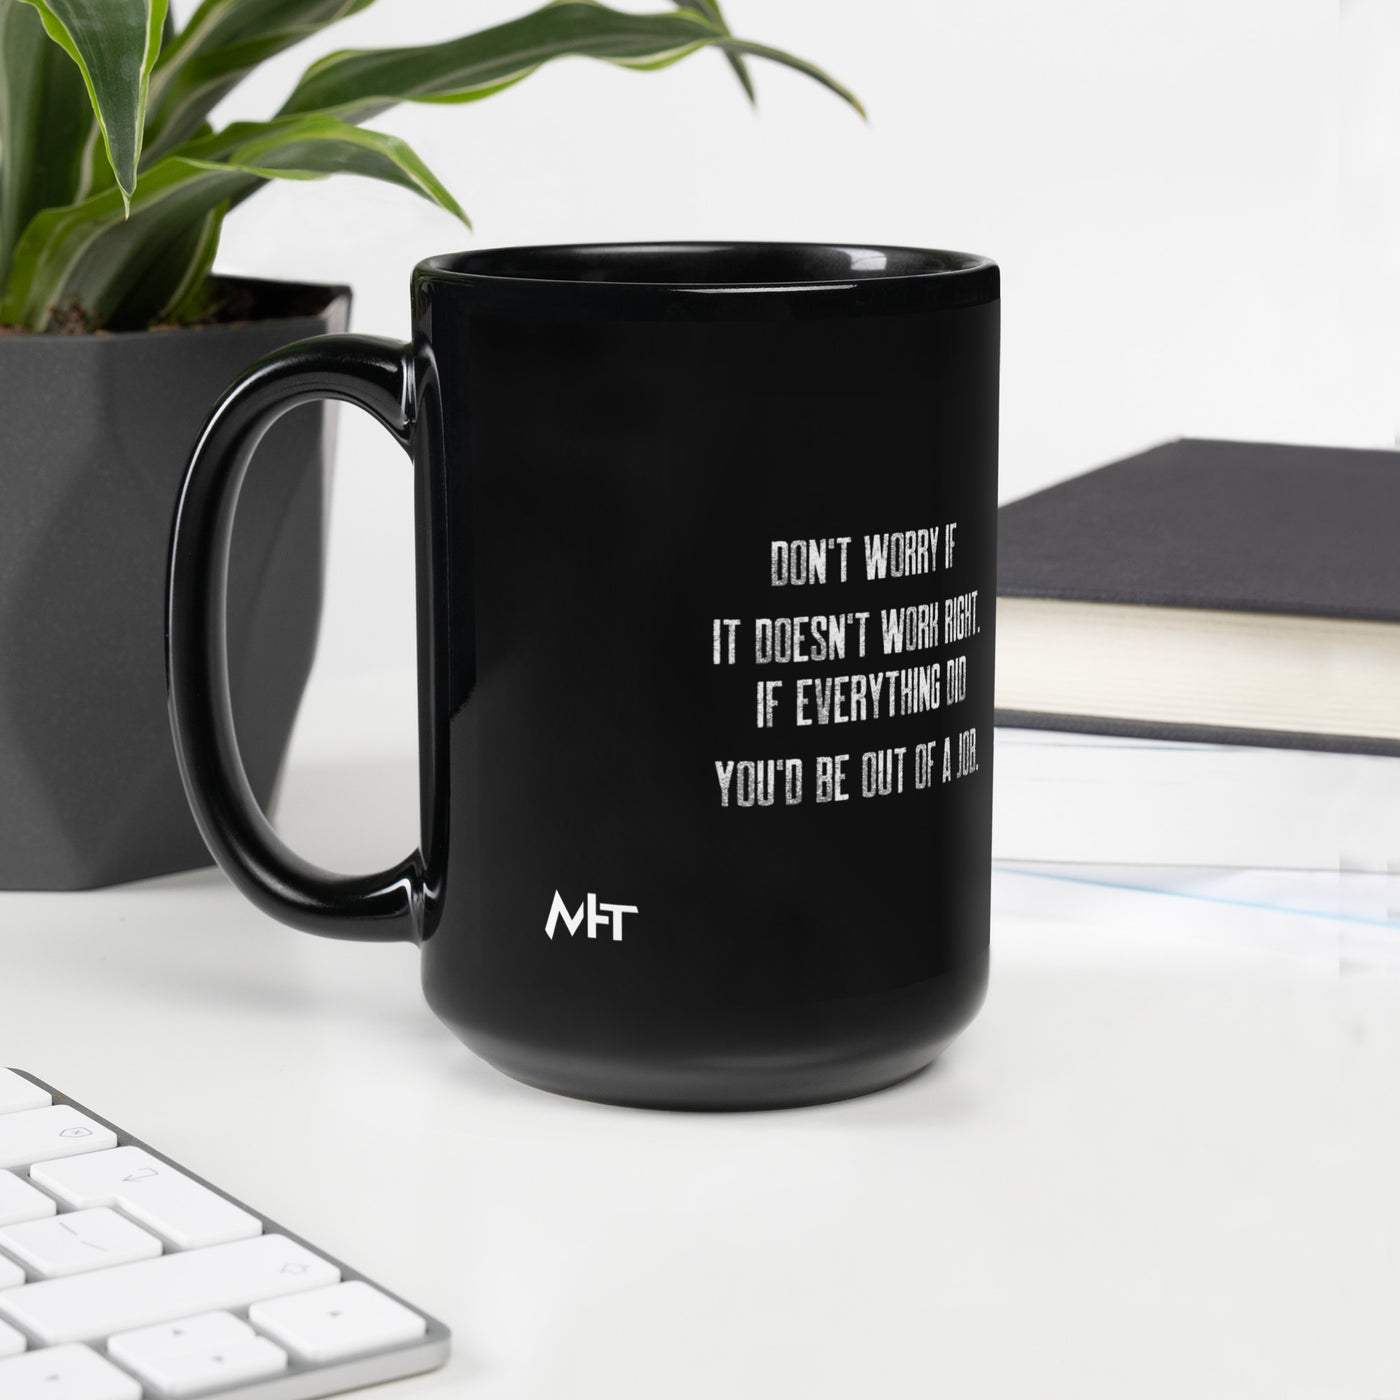 Don't worry if it doesn't work right: if everything did, you would be out of your job V2 - Black Glossy Mug